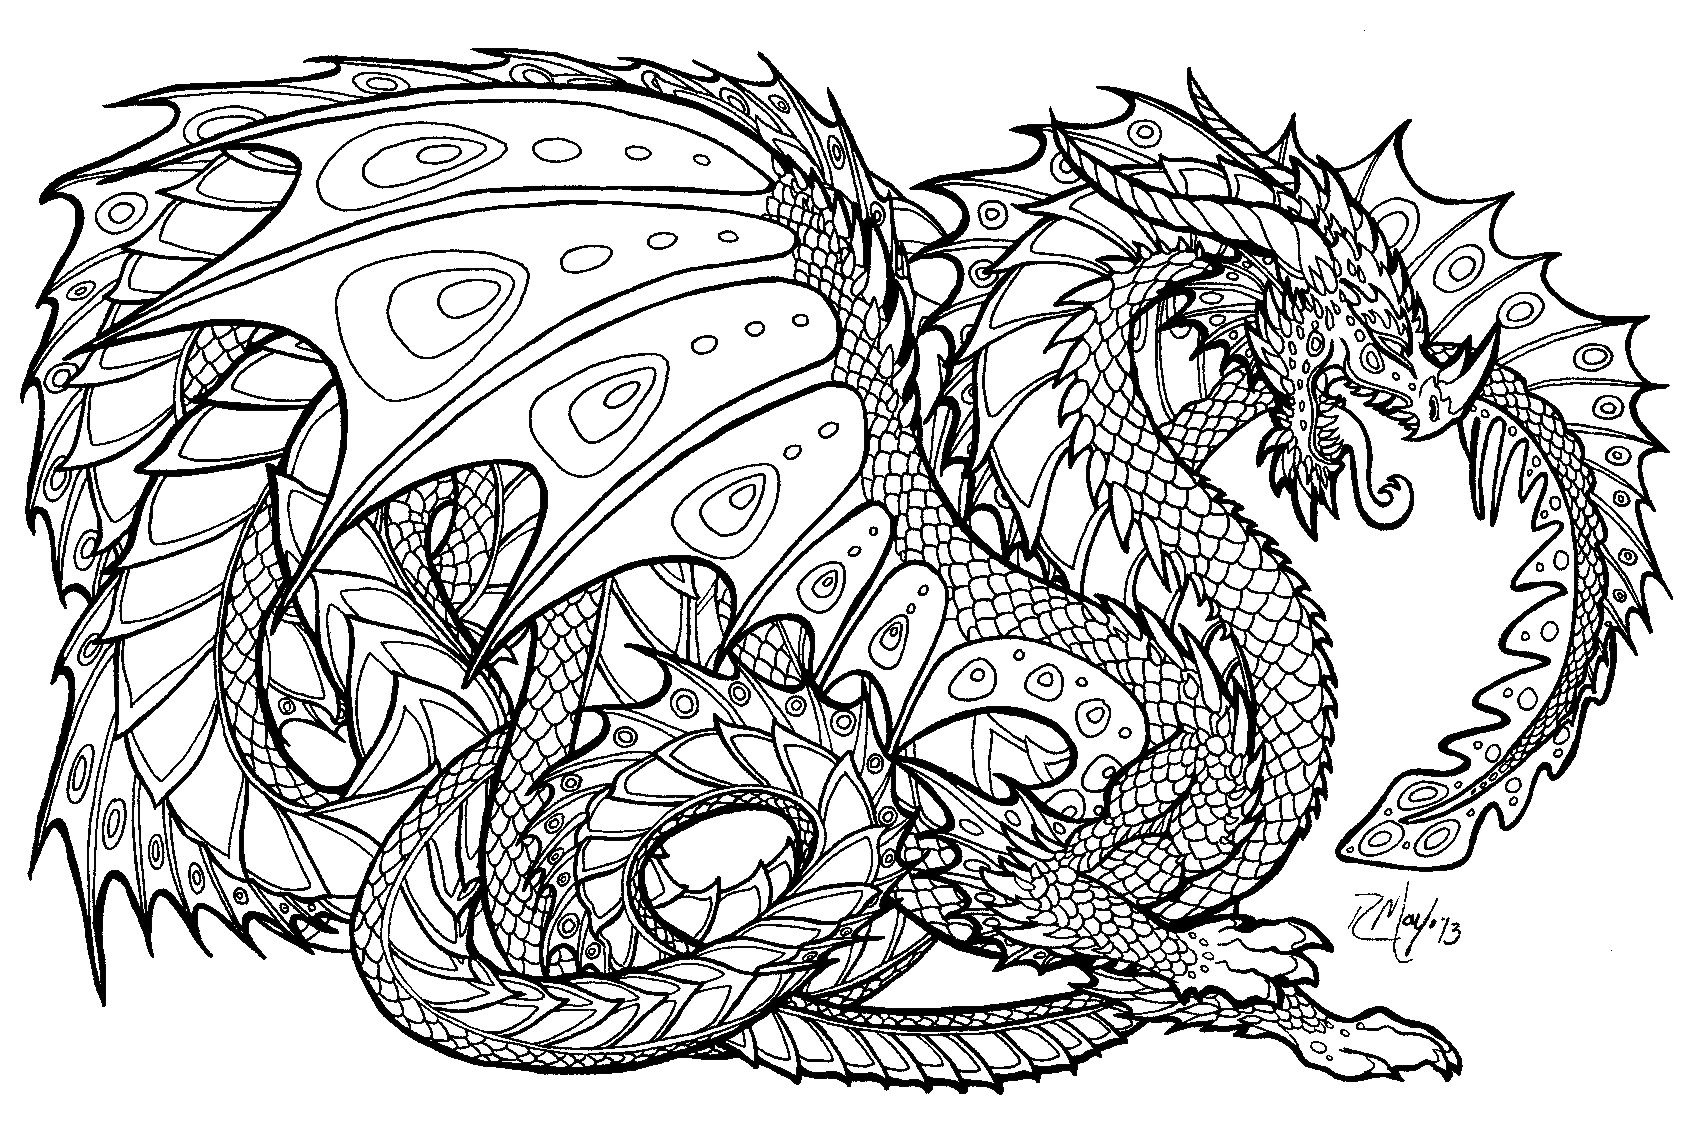 Free Printable Coloring Pages For Adults Advanced Dragons - Google - Free Printable Coloring Pages For Adults Advanced